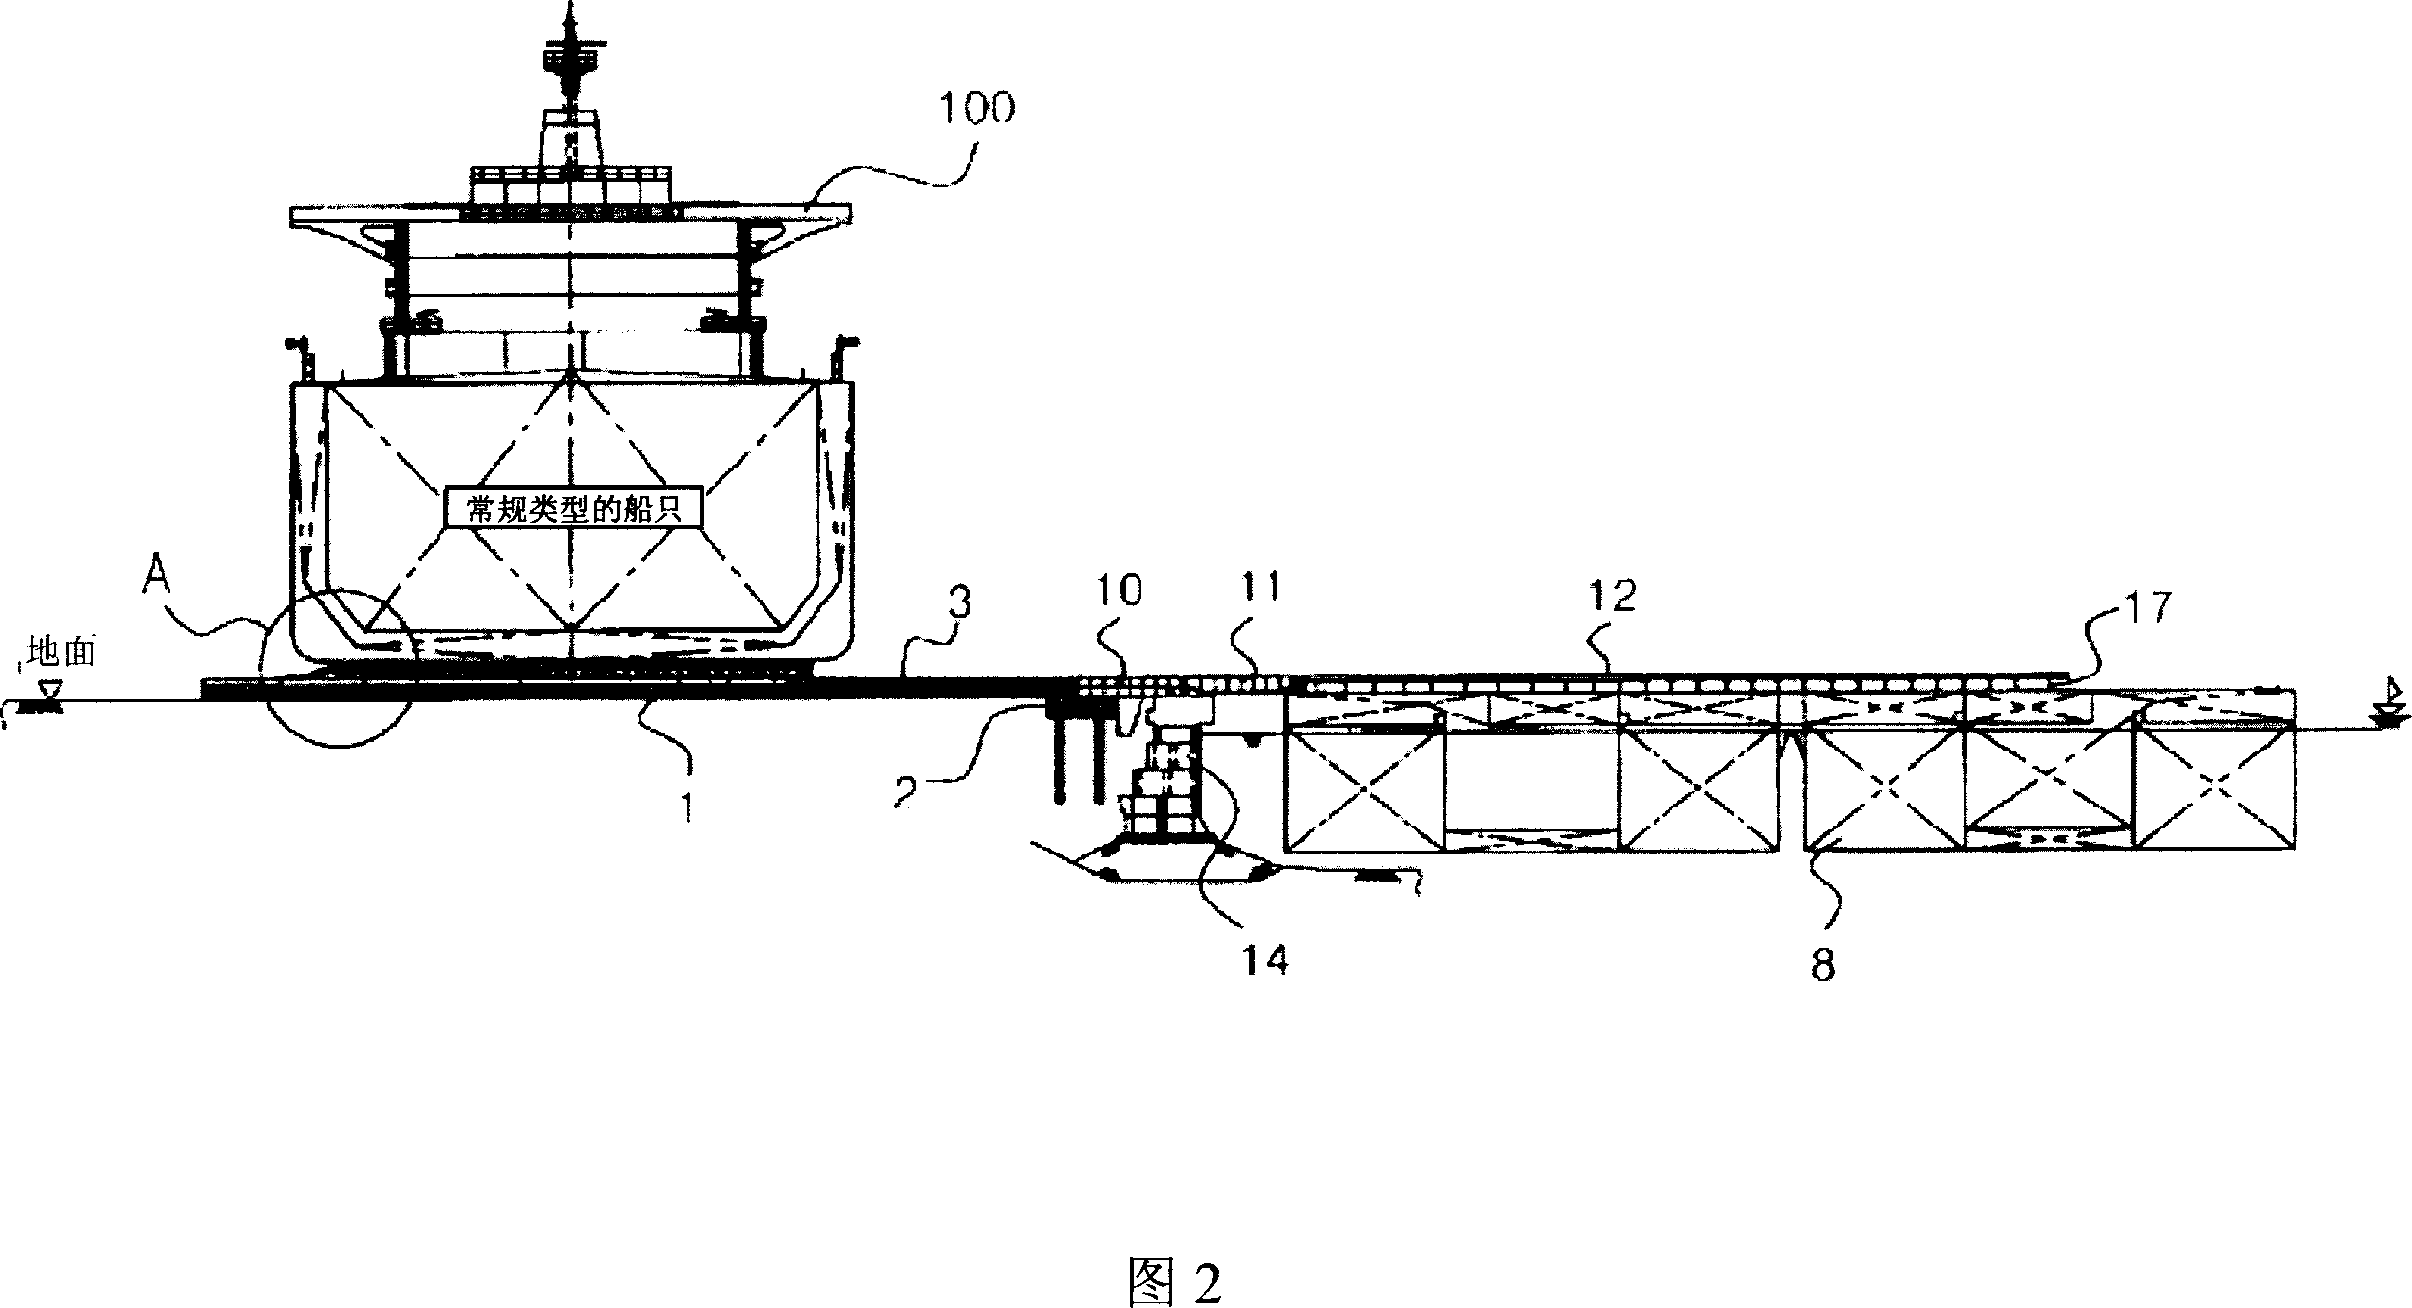 Method and equipment for transversely launching ship built on the ground